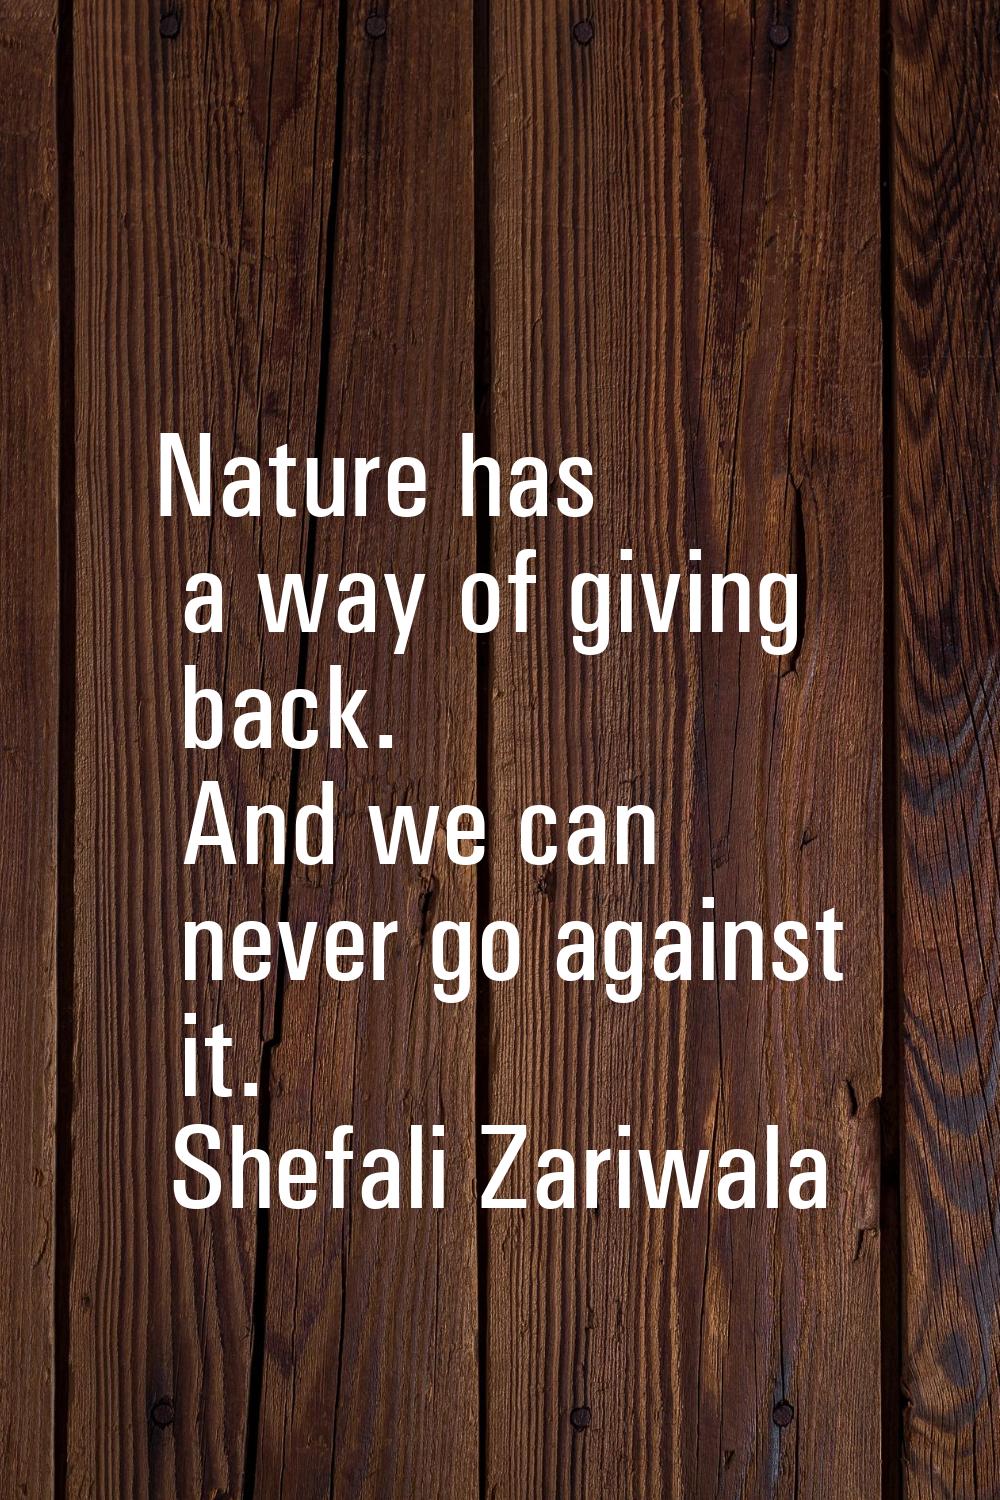 Nature has a way of giving back. And we can never go against it.